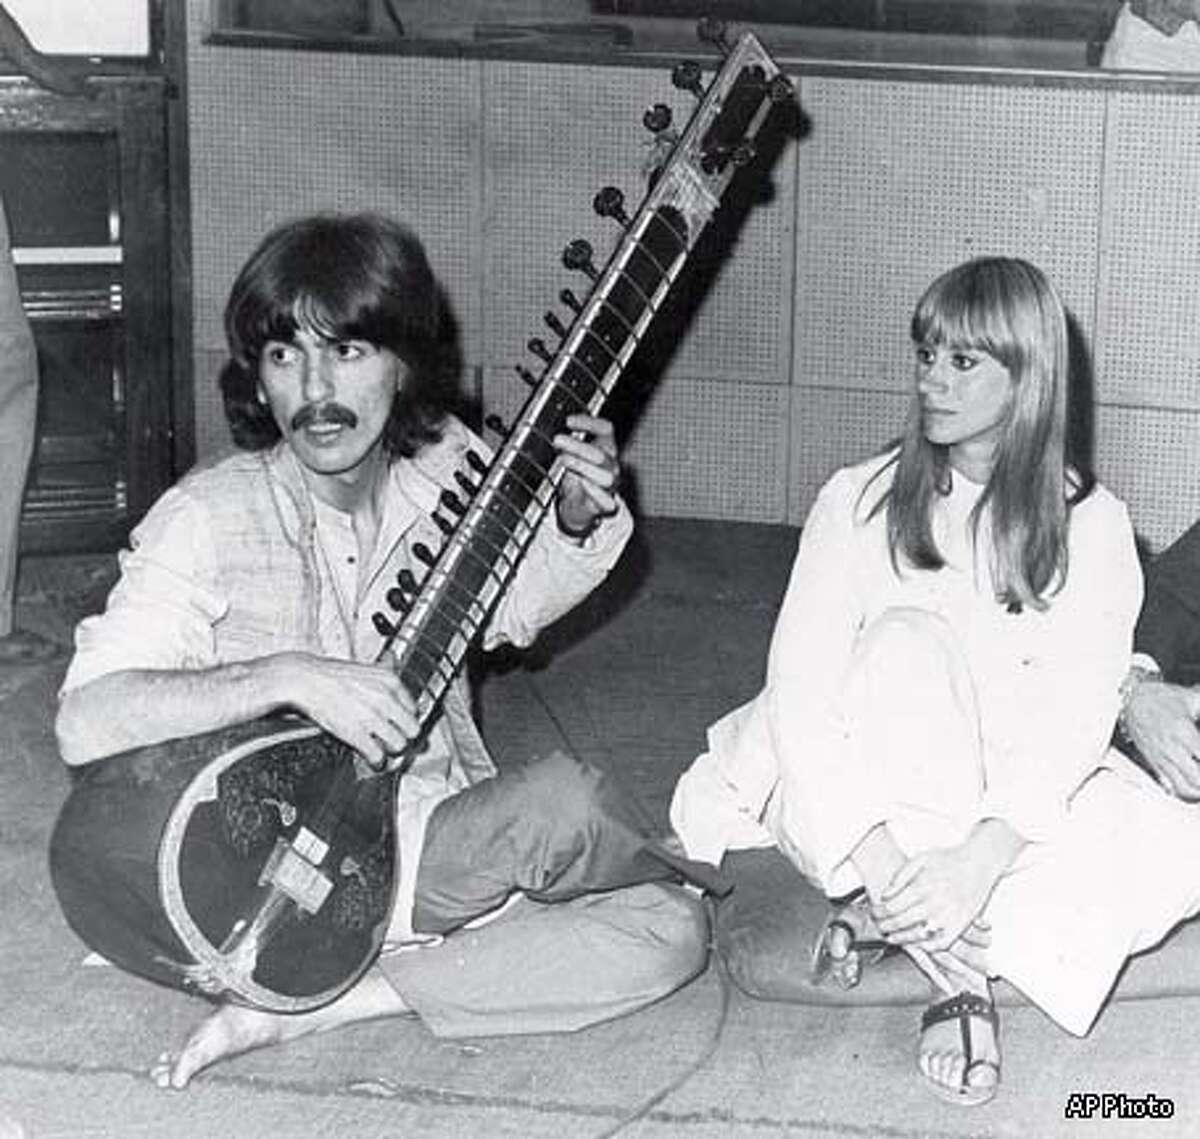 FILE--George Harrison plays the sitar in Bombay, India in this Jan. 14, 1968, file photo. Harrison died Thursday Nov. 29, 2001, a longtime family friend said. He was 58. At right is British actress Rita Tushingham, who was making a motion picture in India. (AP Photo)